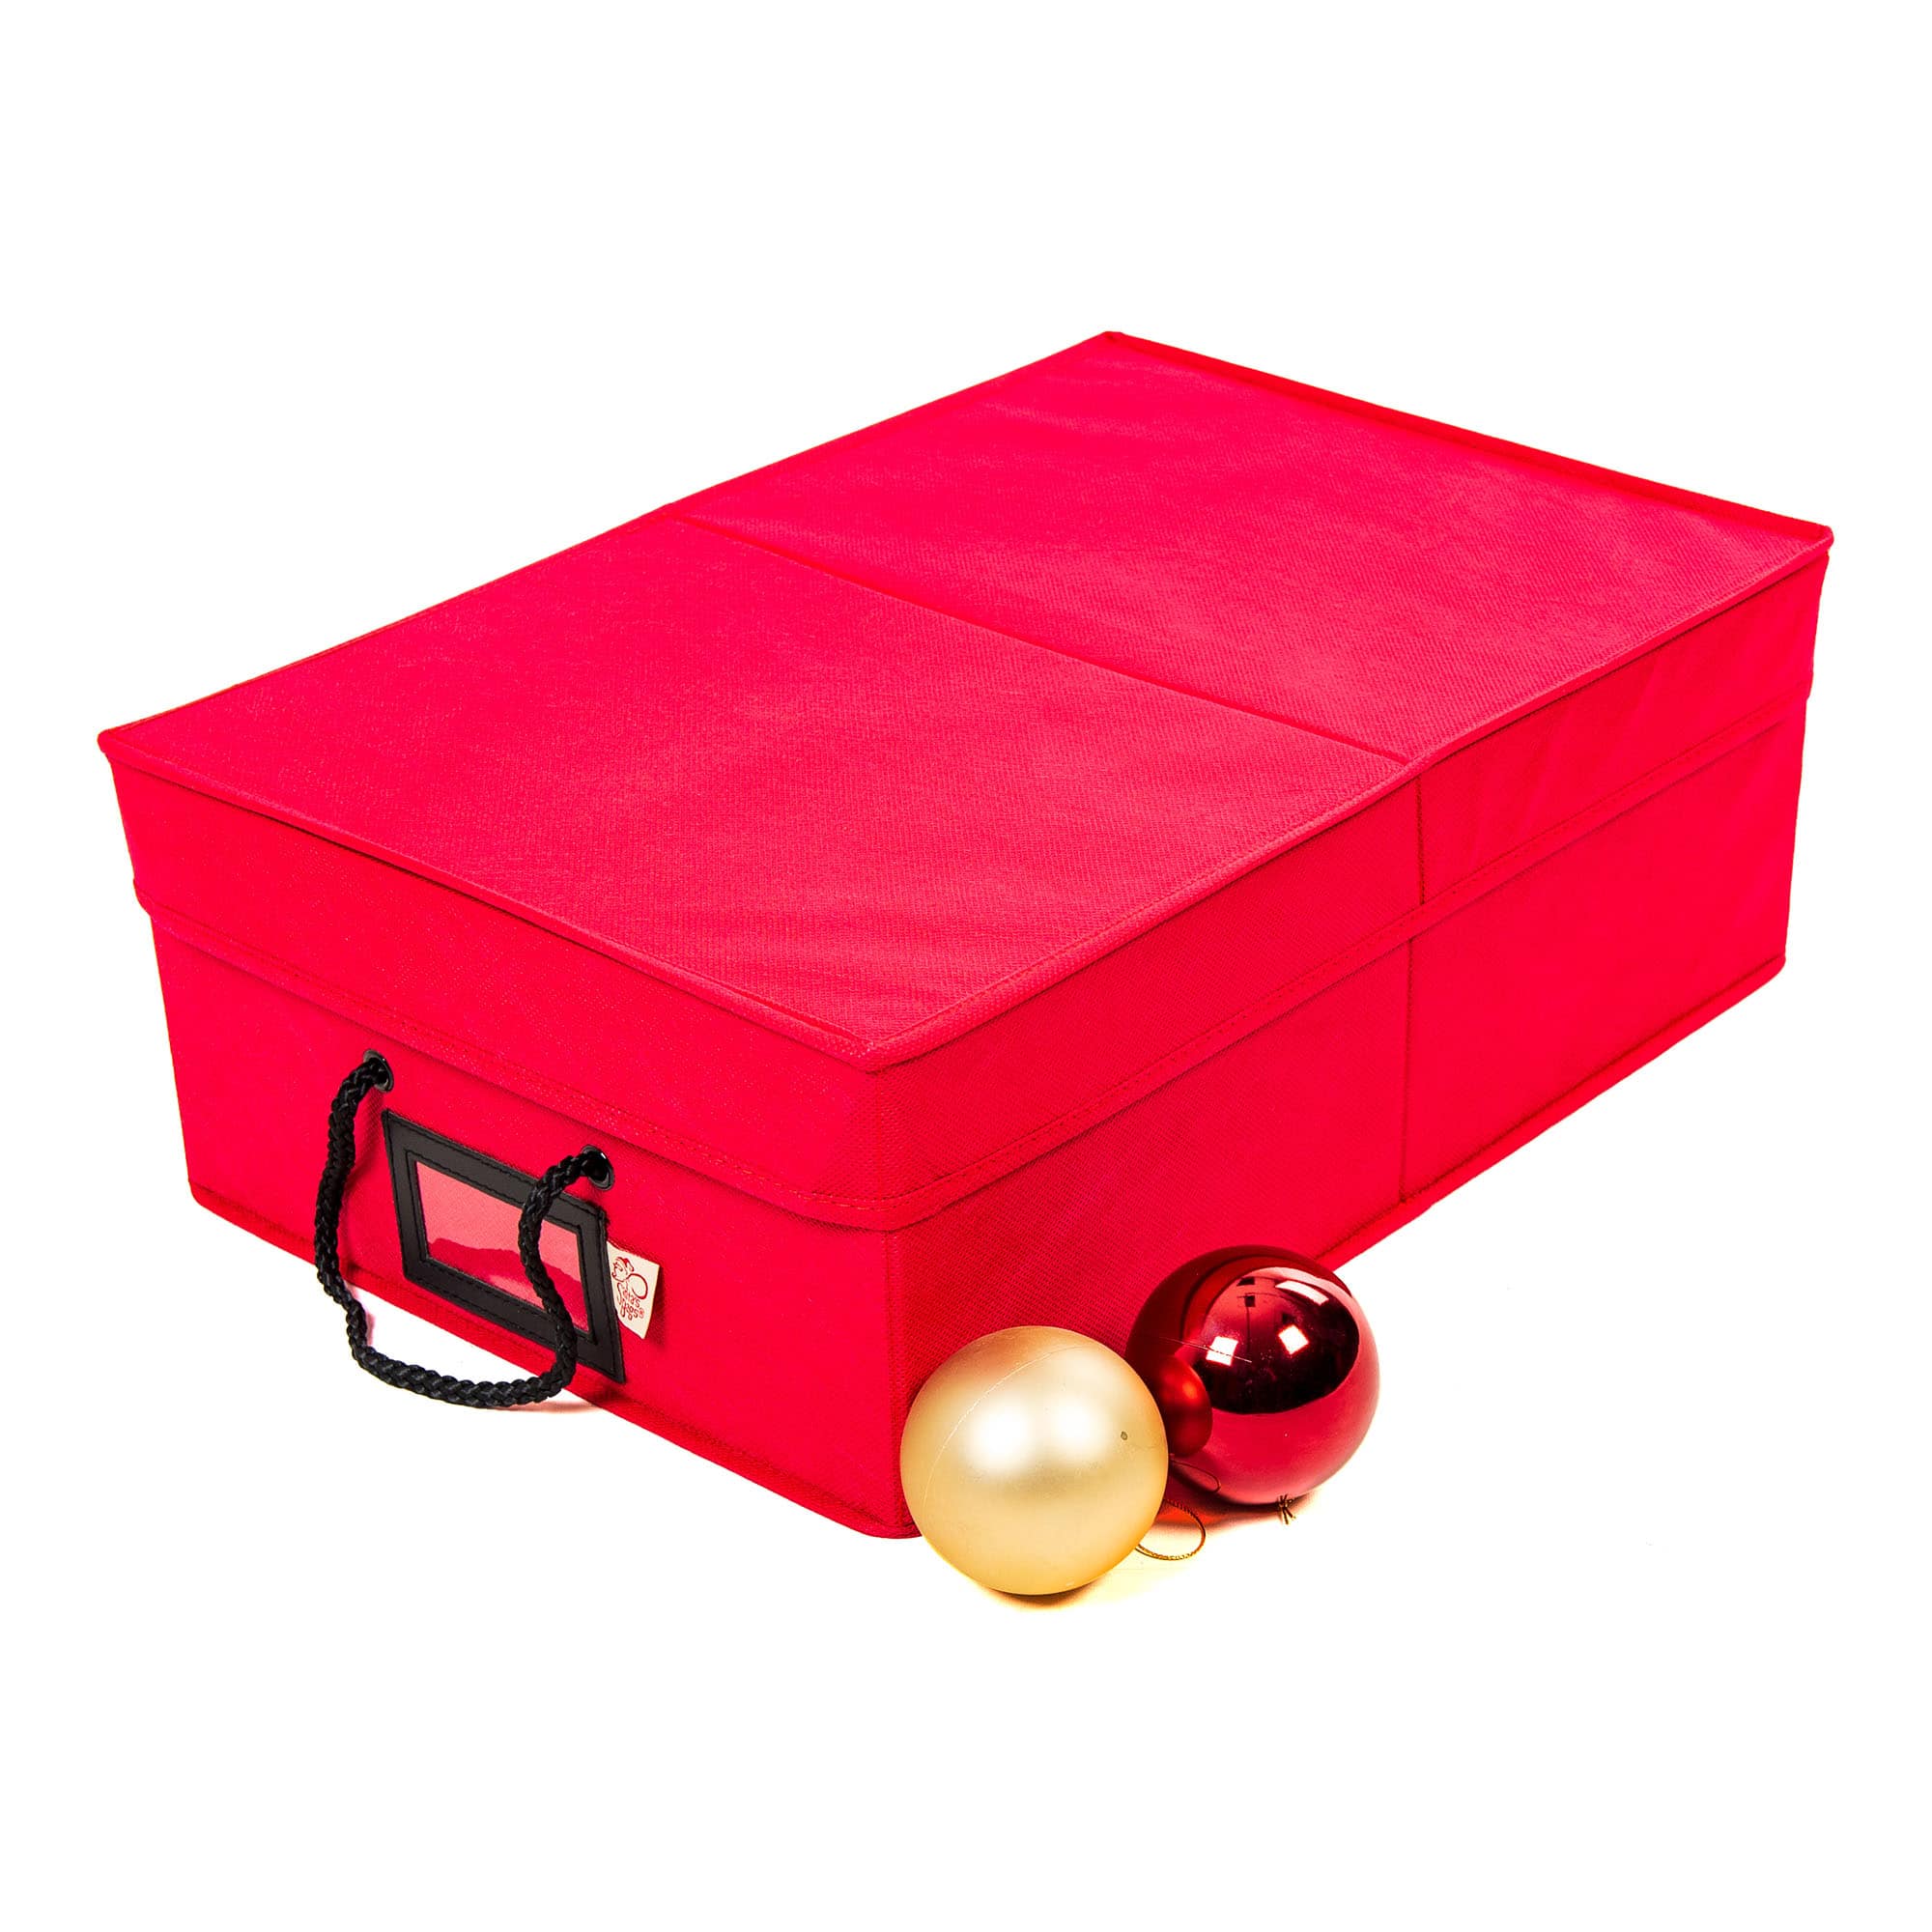 Ornament Storage Boxes at